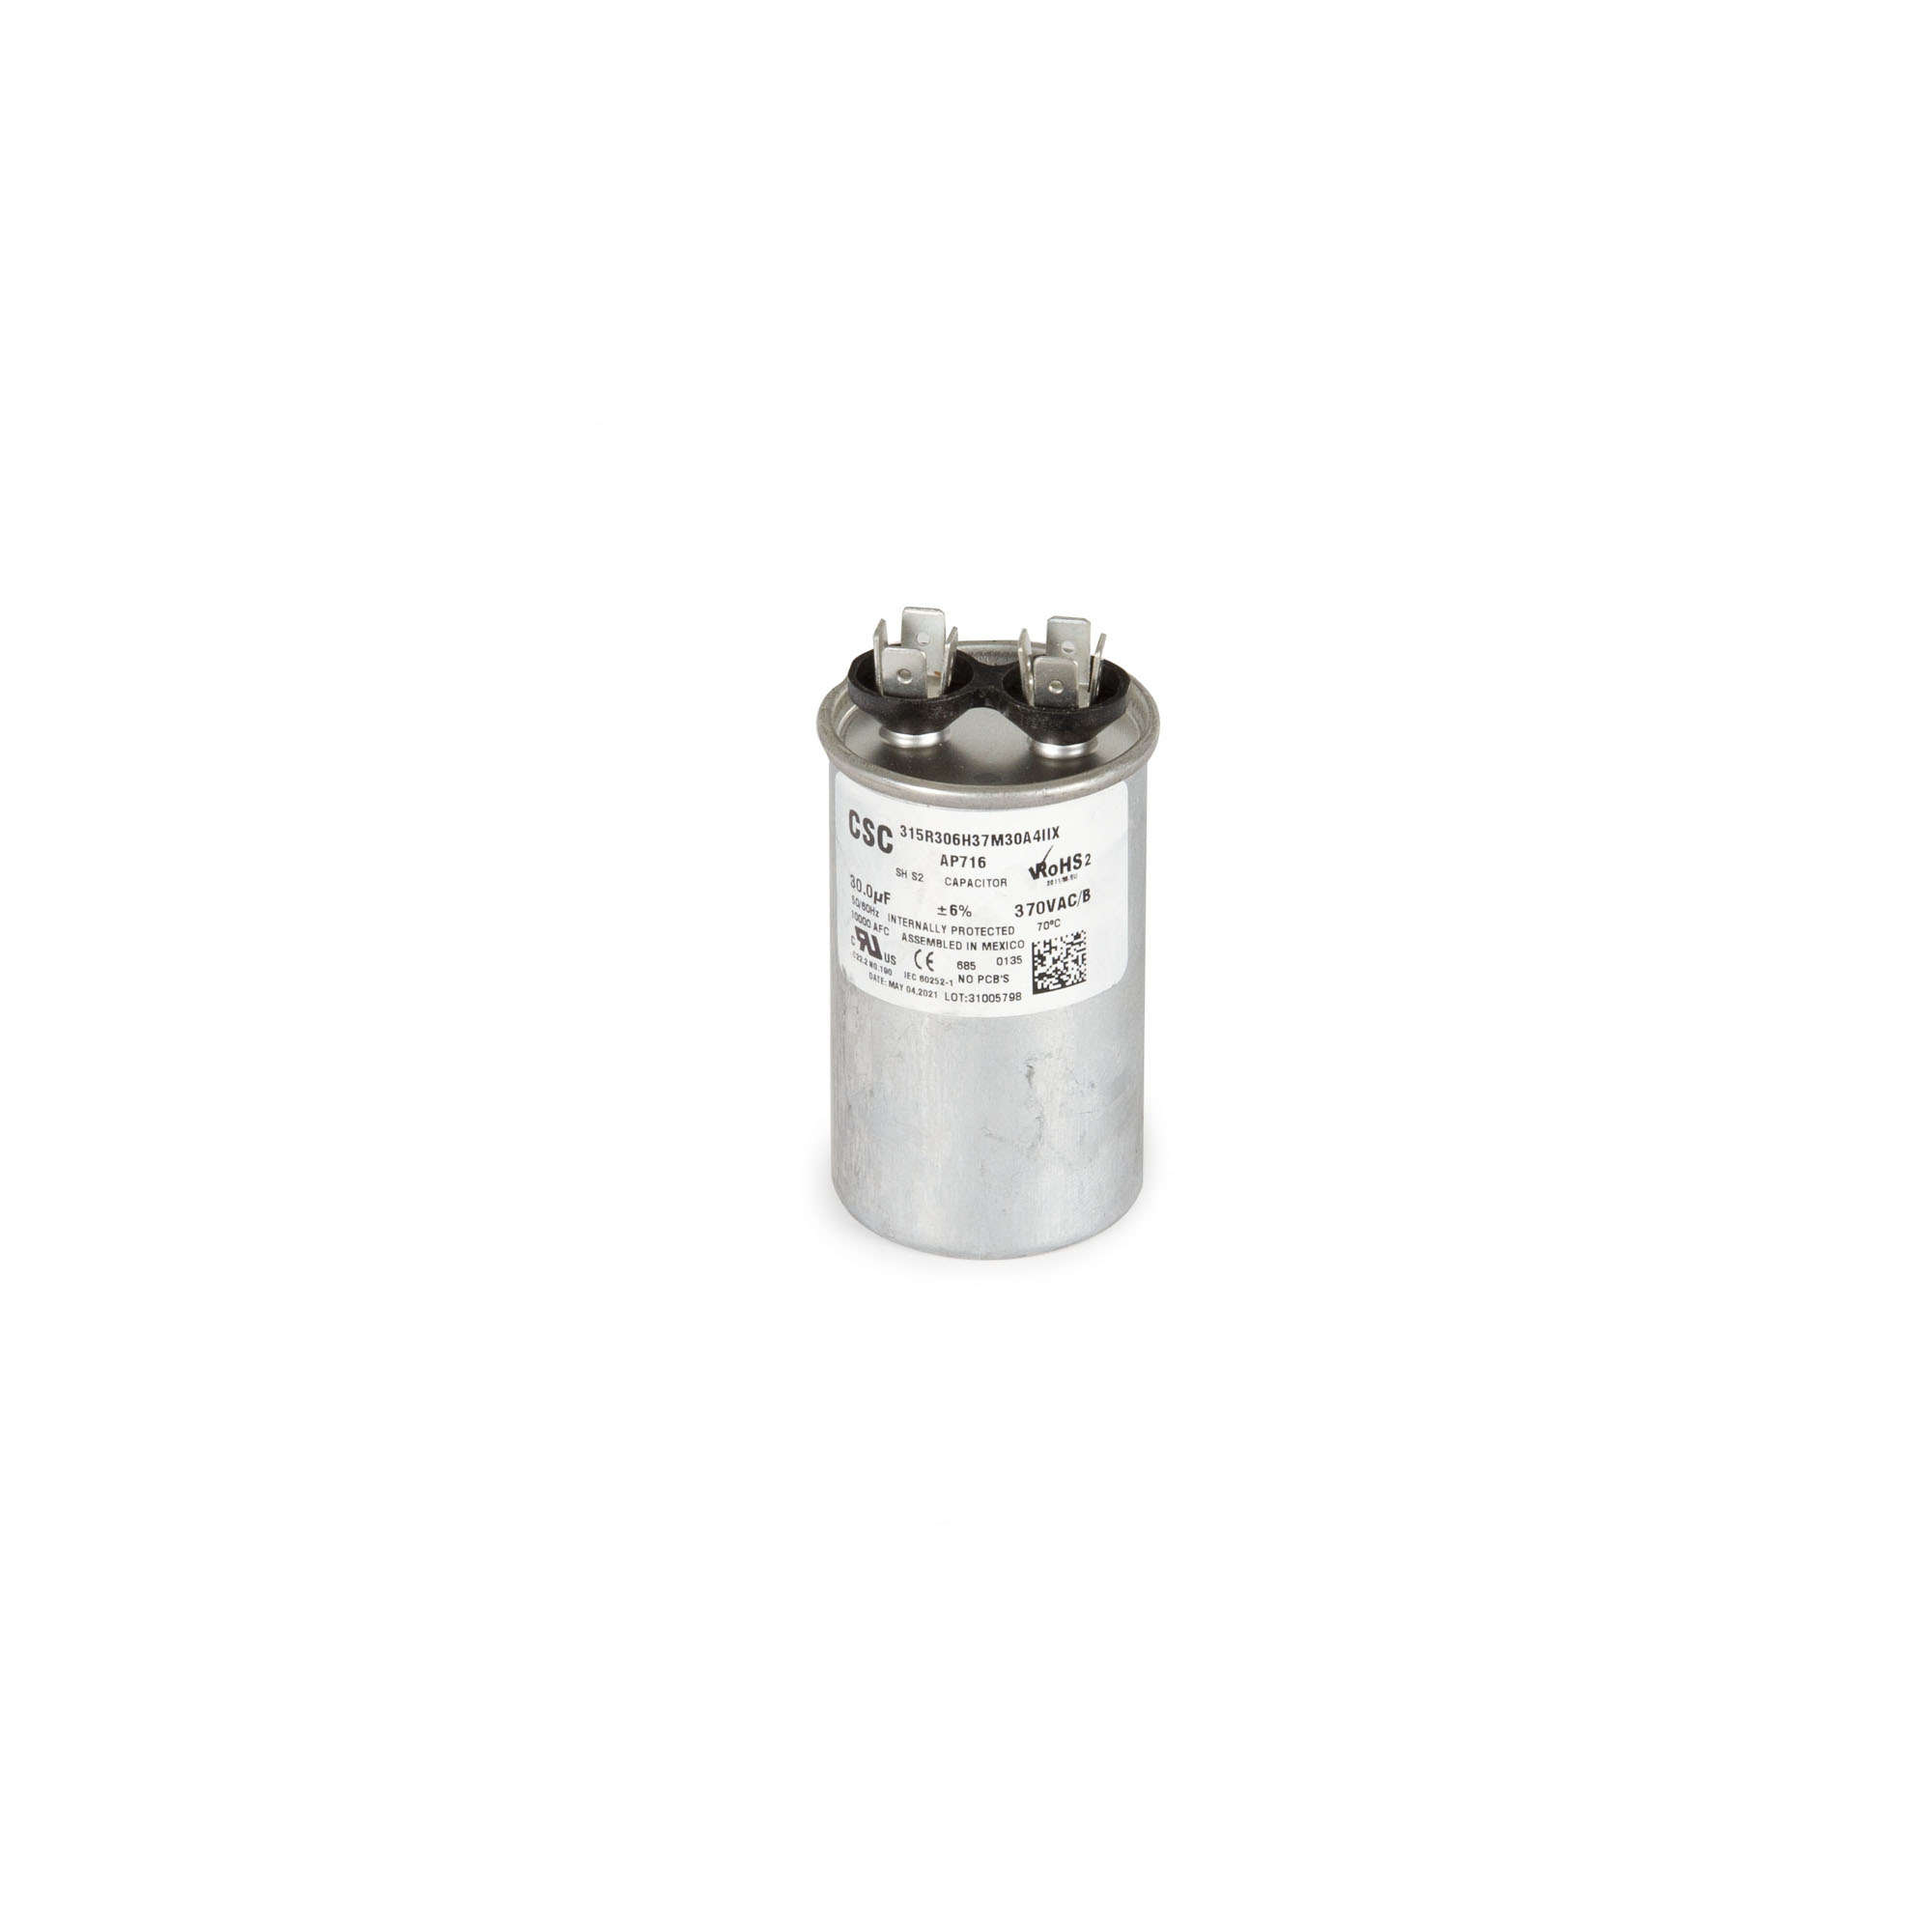 TPD 87R6 Capacitor